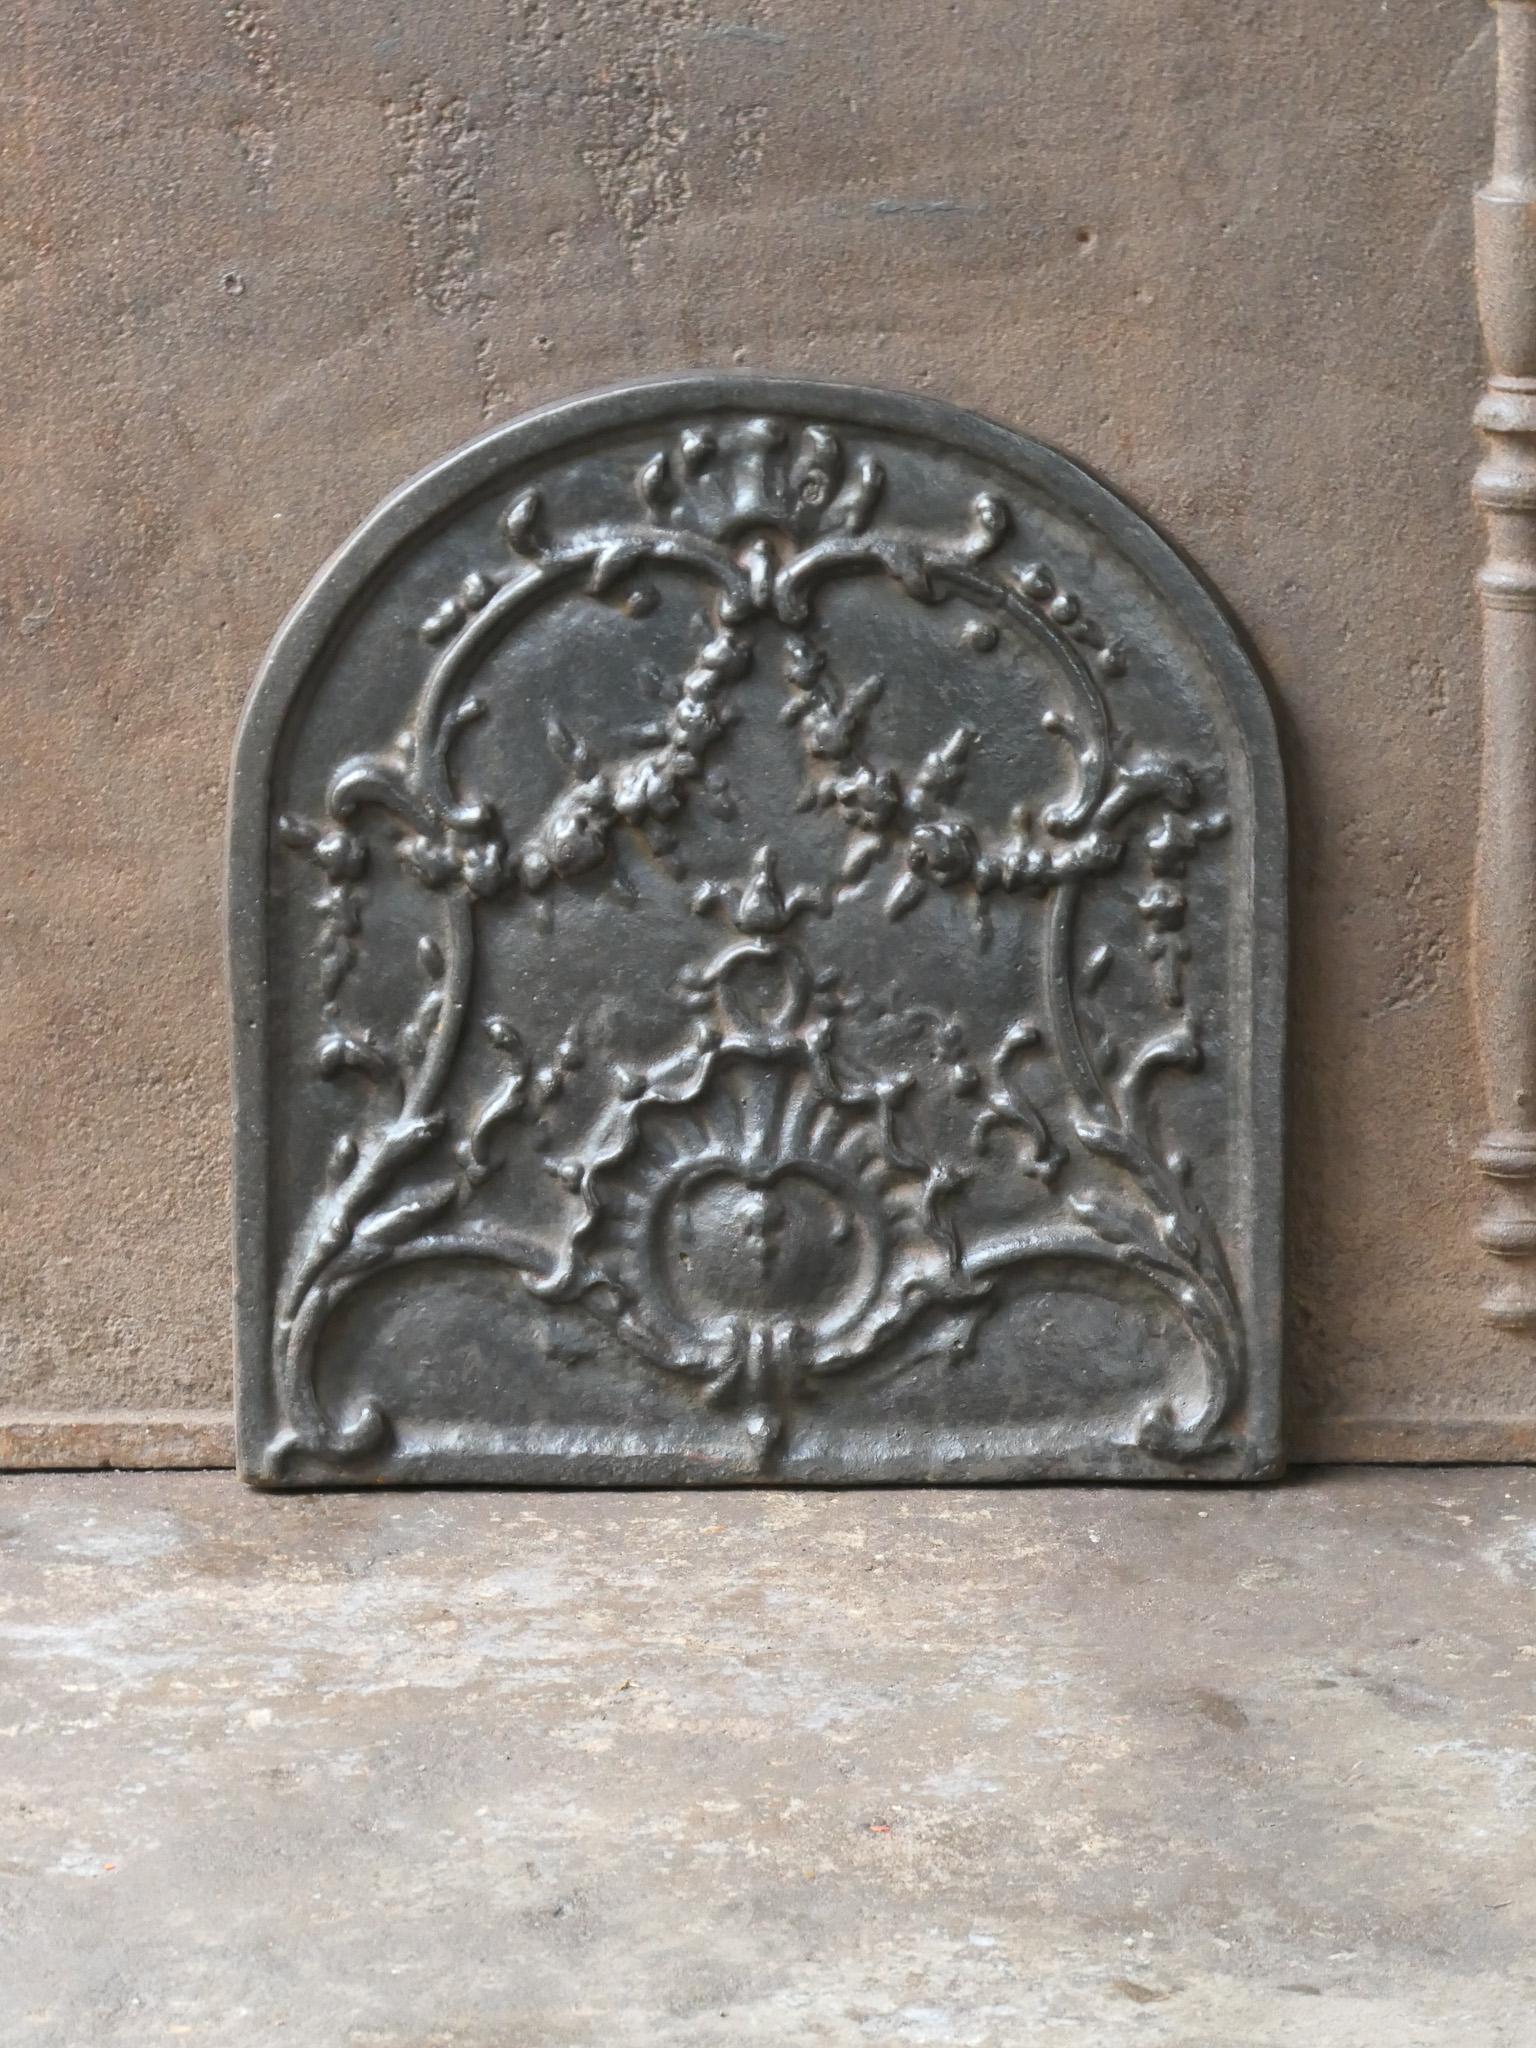 20th century French Louis XV style fireback with a typical Louis XV decoration.

The fireback is made of cast iron and has a natural brown patina. Upon request it can be made black / pewter colored with stove polish at no extra cost. It is in a good